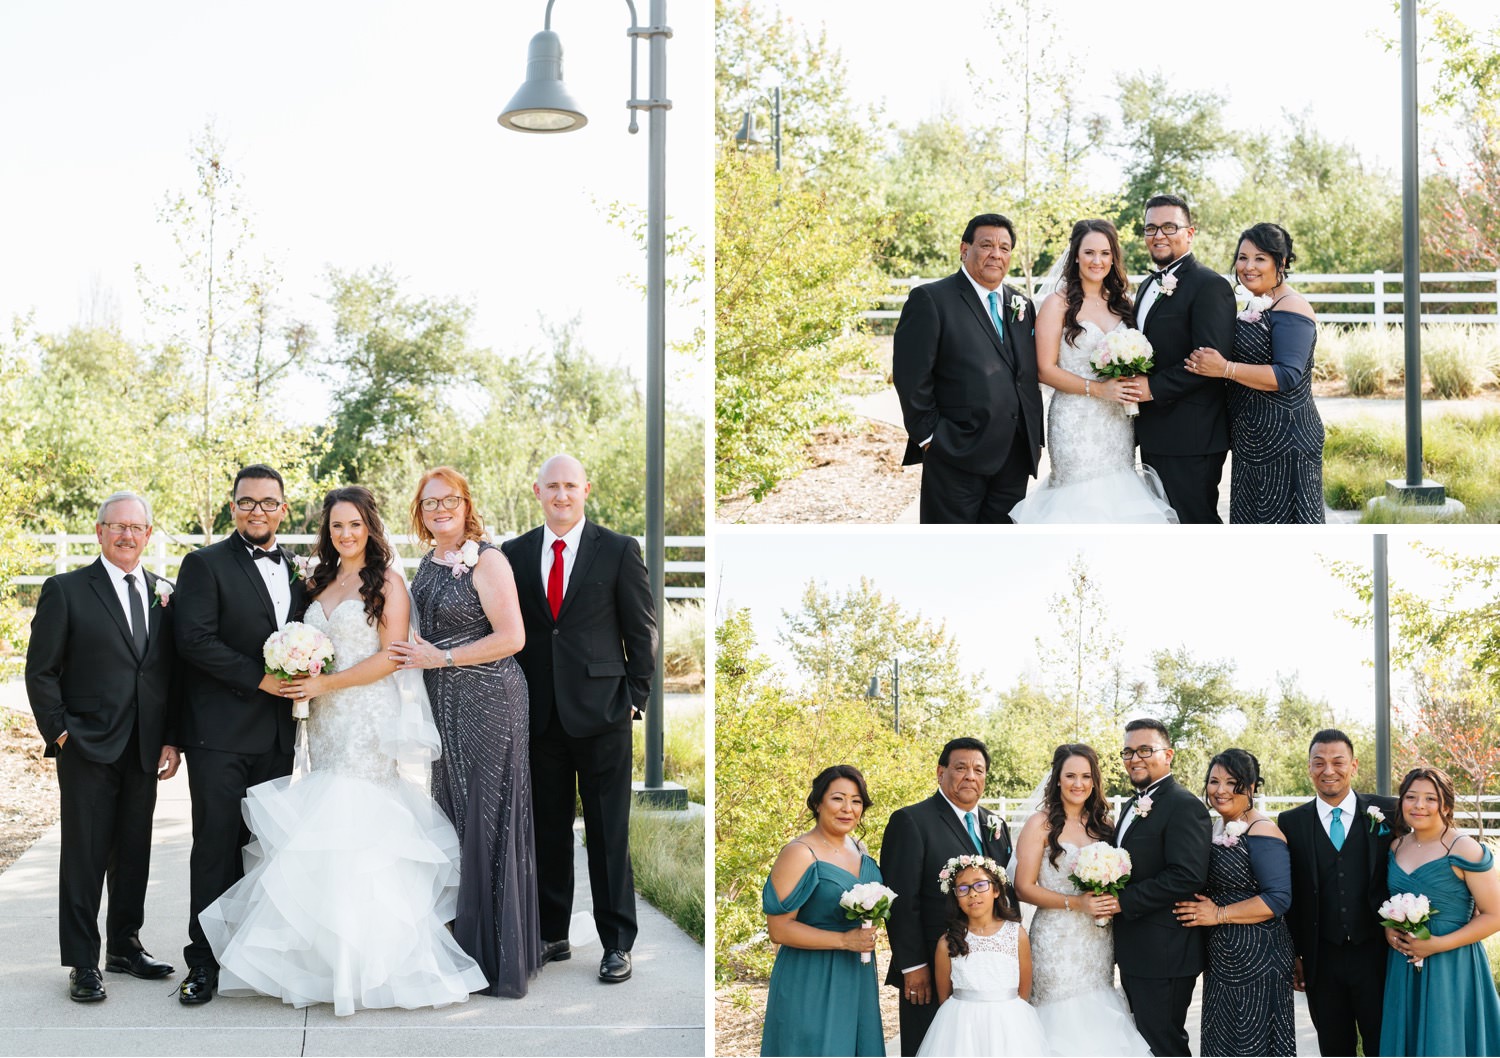 Chino Hills Wedding Photographer - Family Photos - https://brittneyhannonphotography.com